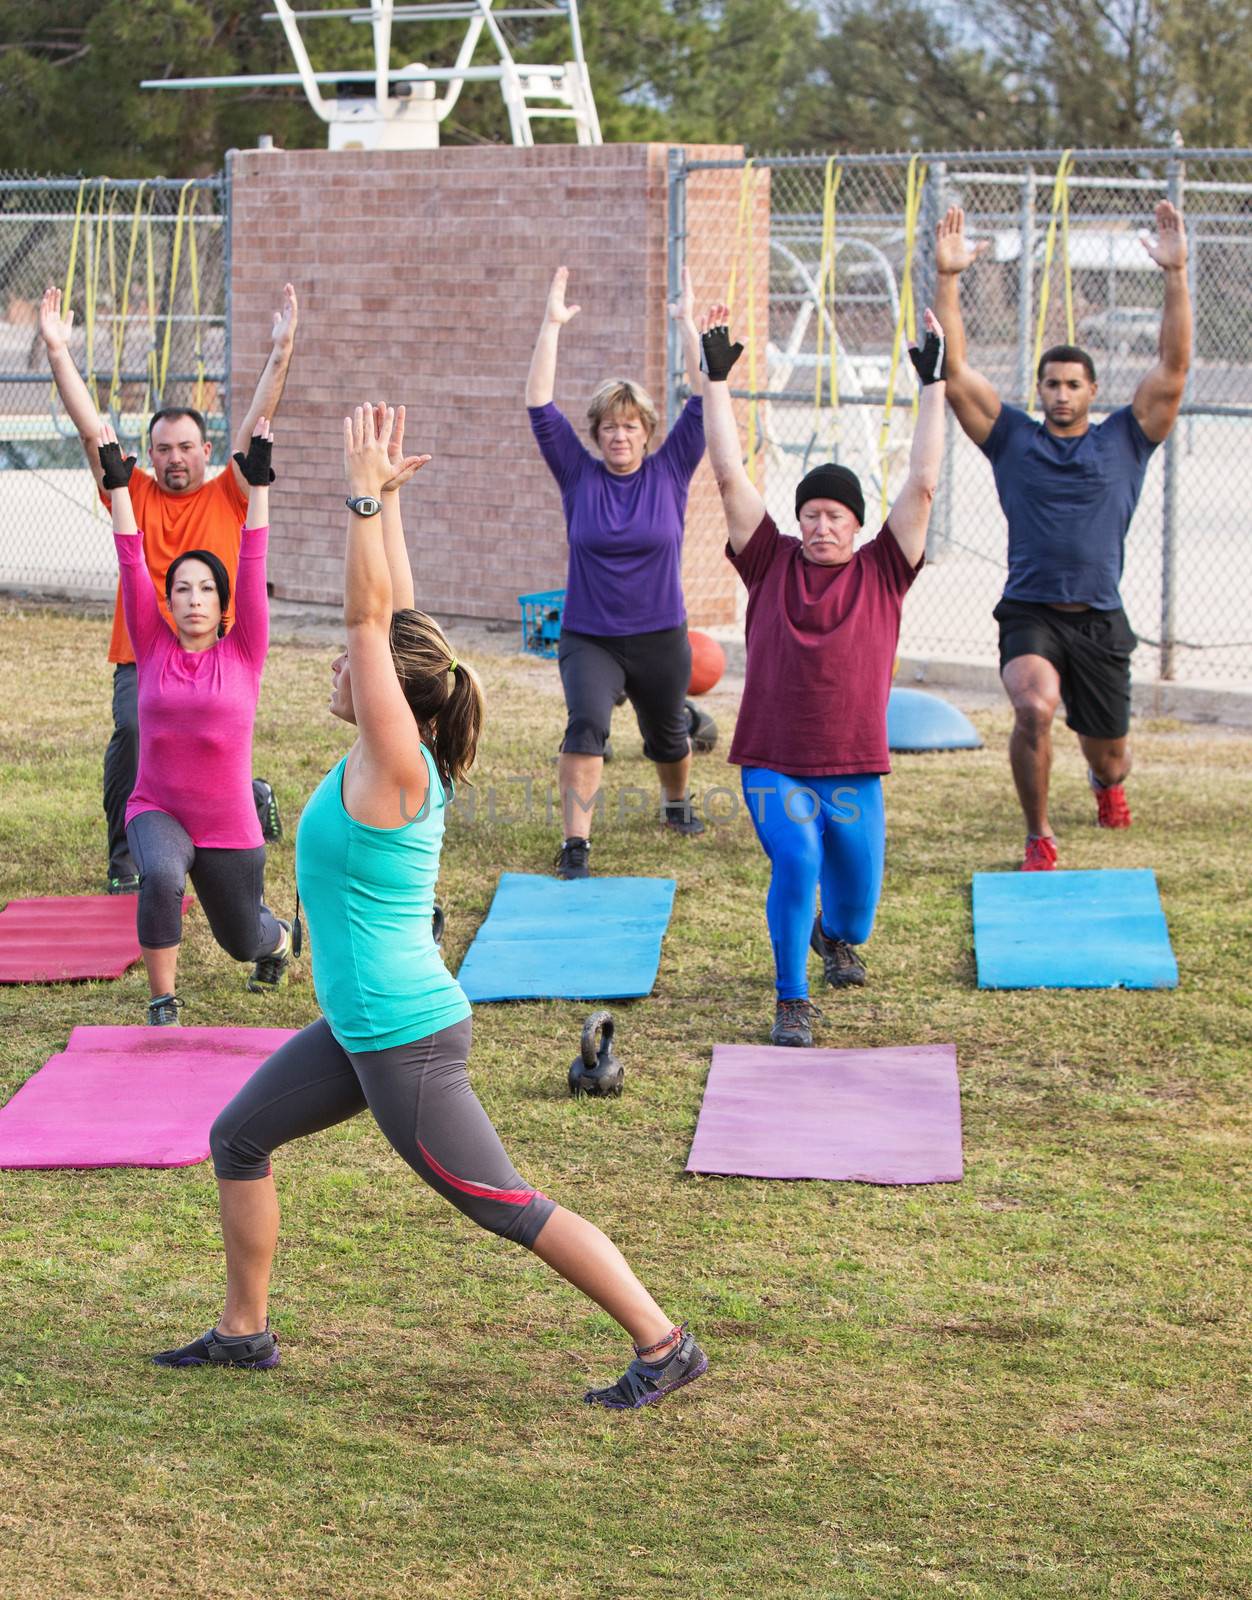 Exercise Class Stretching Outdoors by Creatista